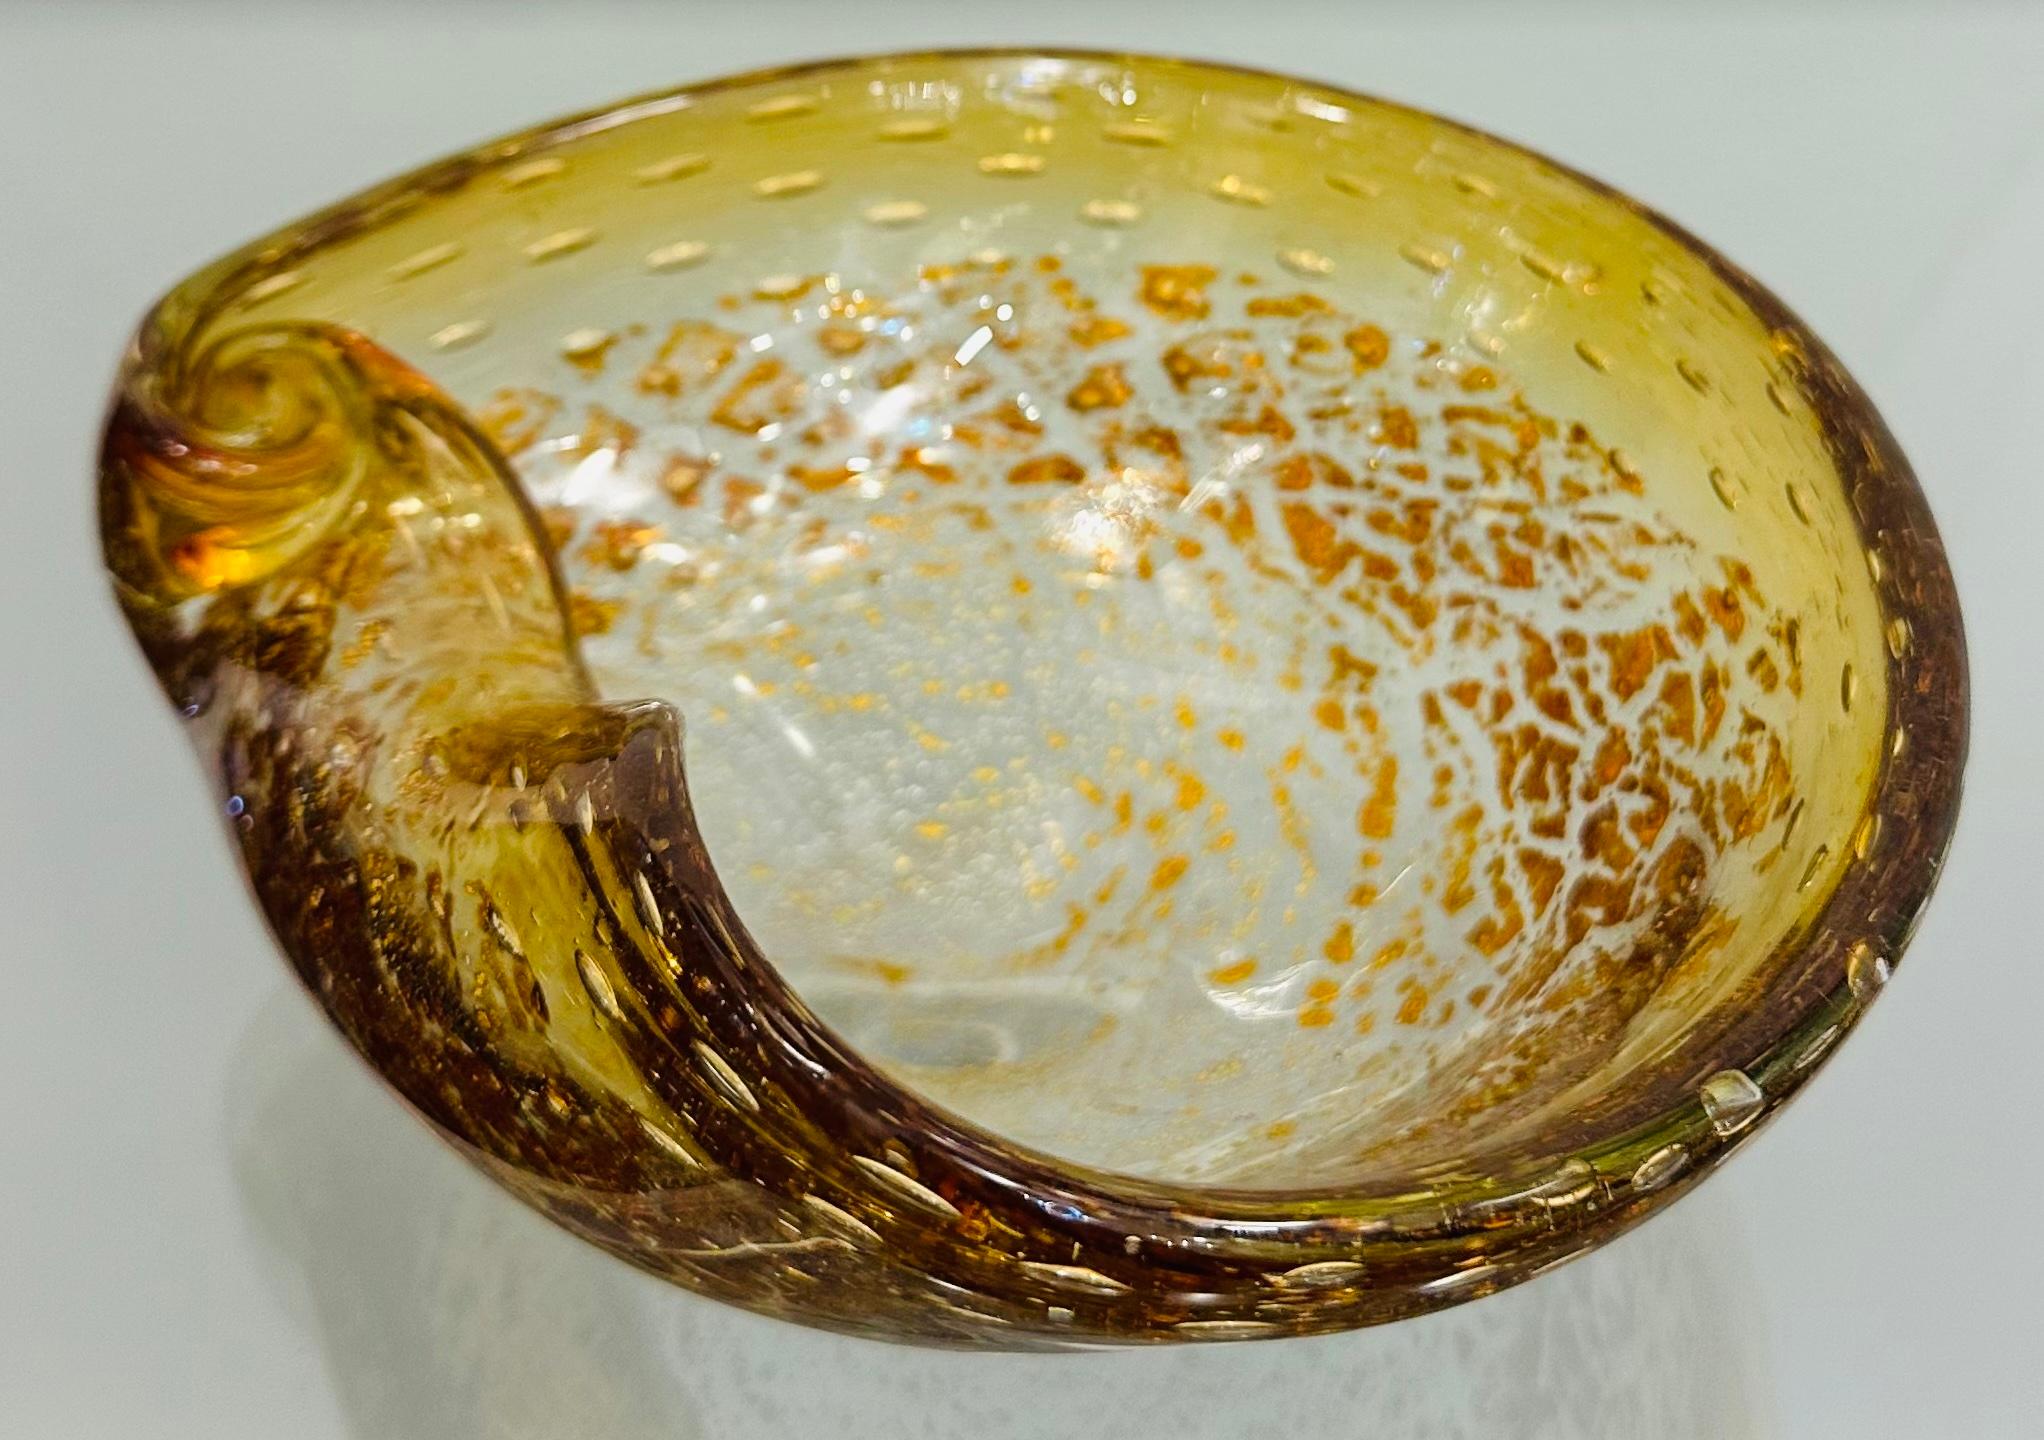 1960s Italian Murano glass bowl or dish formerly known as an ashtray. Handblown in gold and clear glass with gold inclusions circling over the whole exterior which  grow larger towards the edge.  A circular rose bud shape has been blown into the